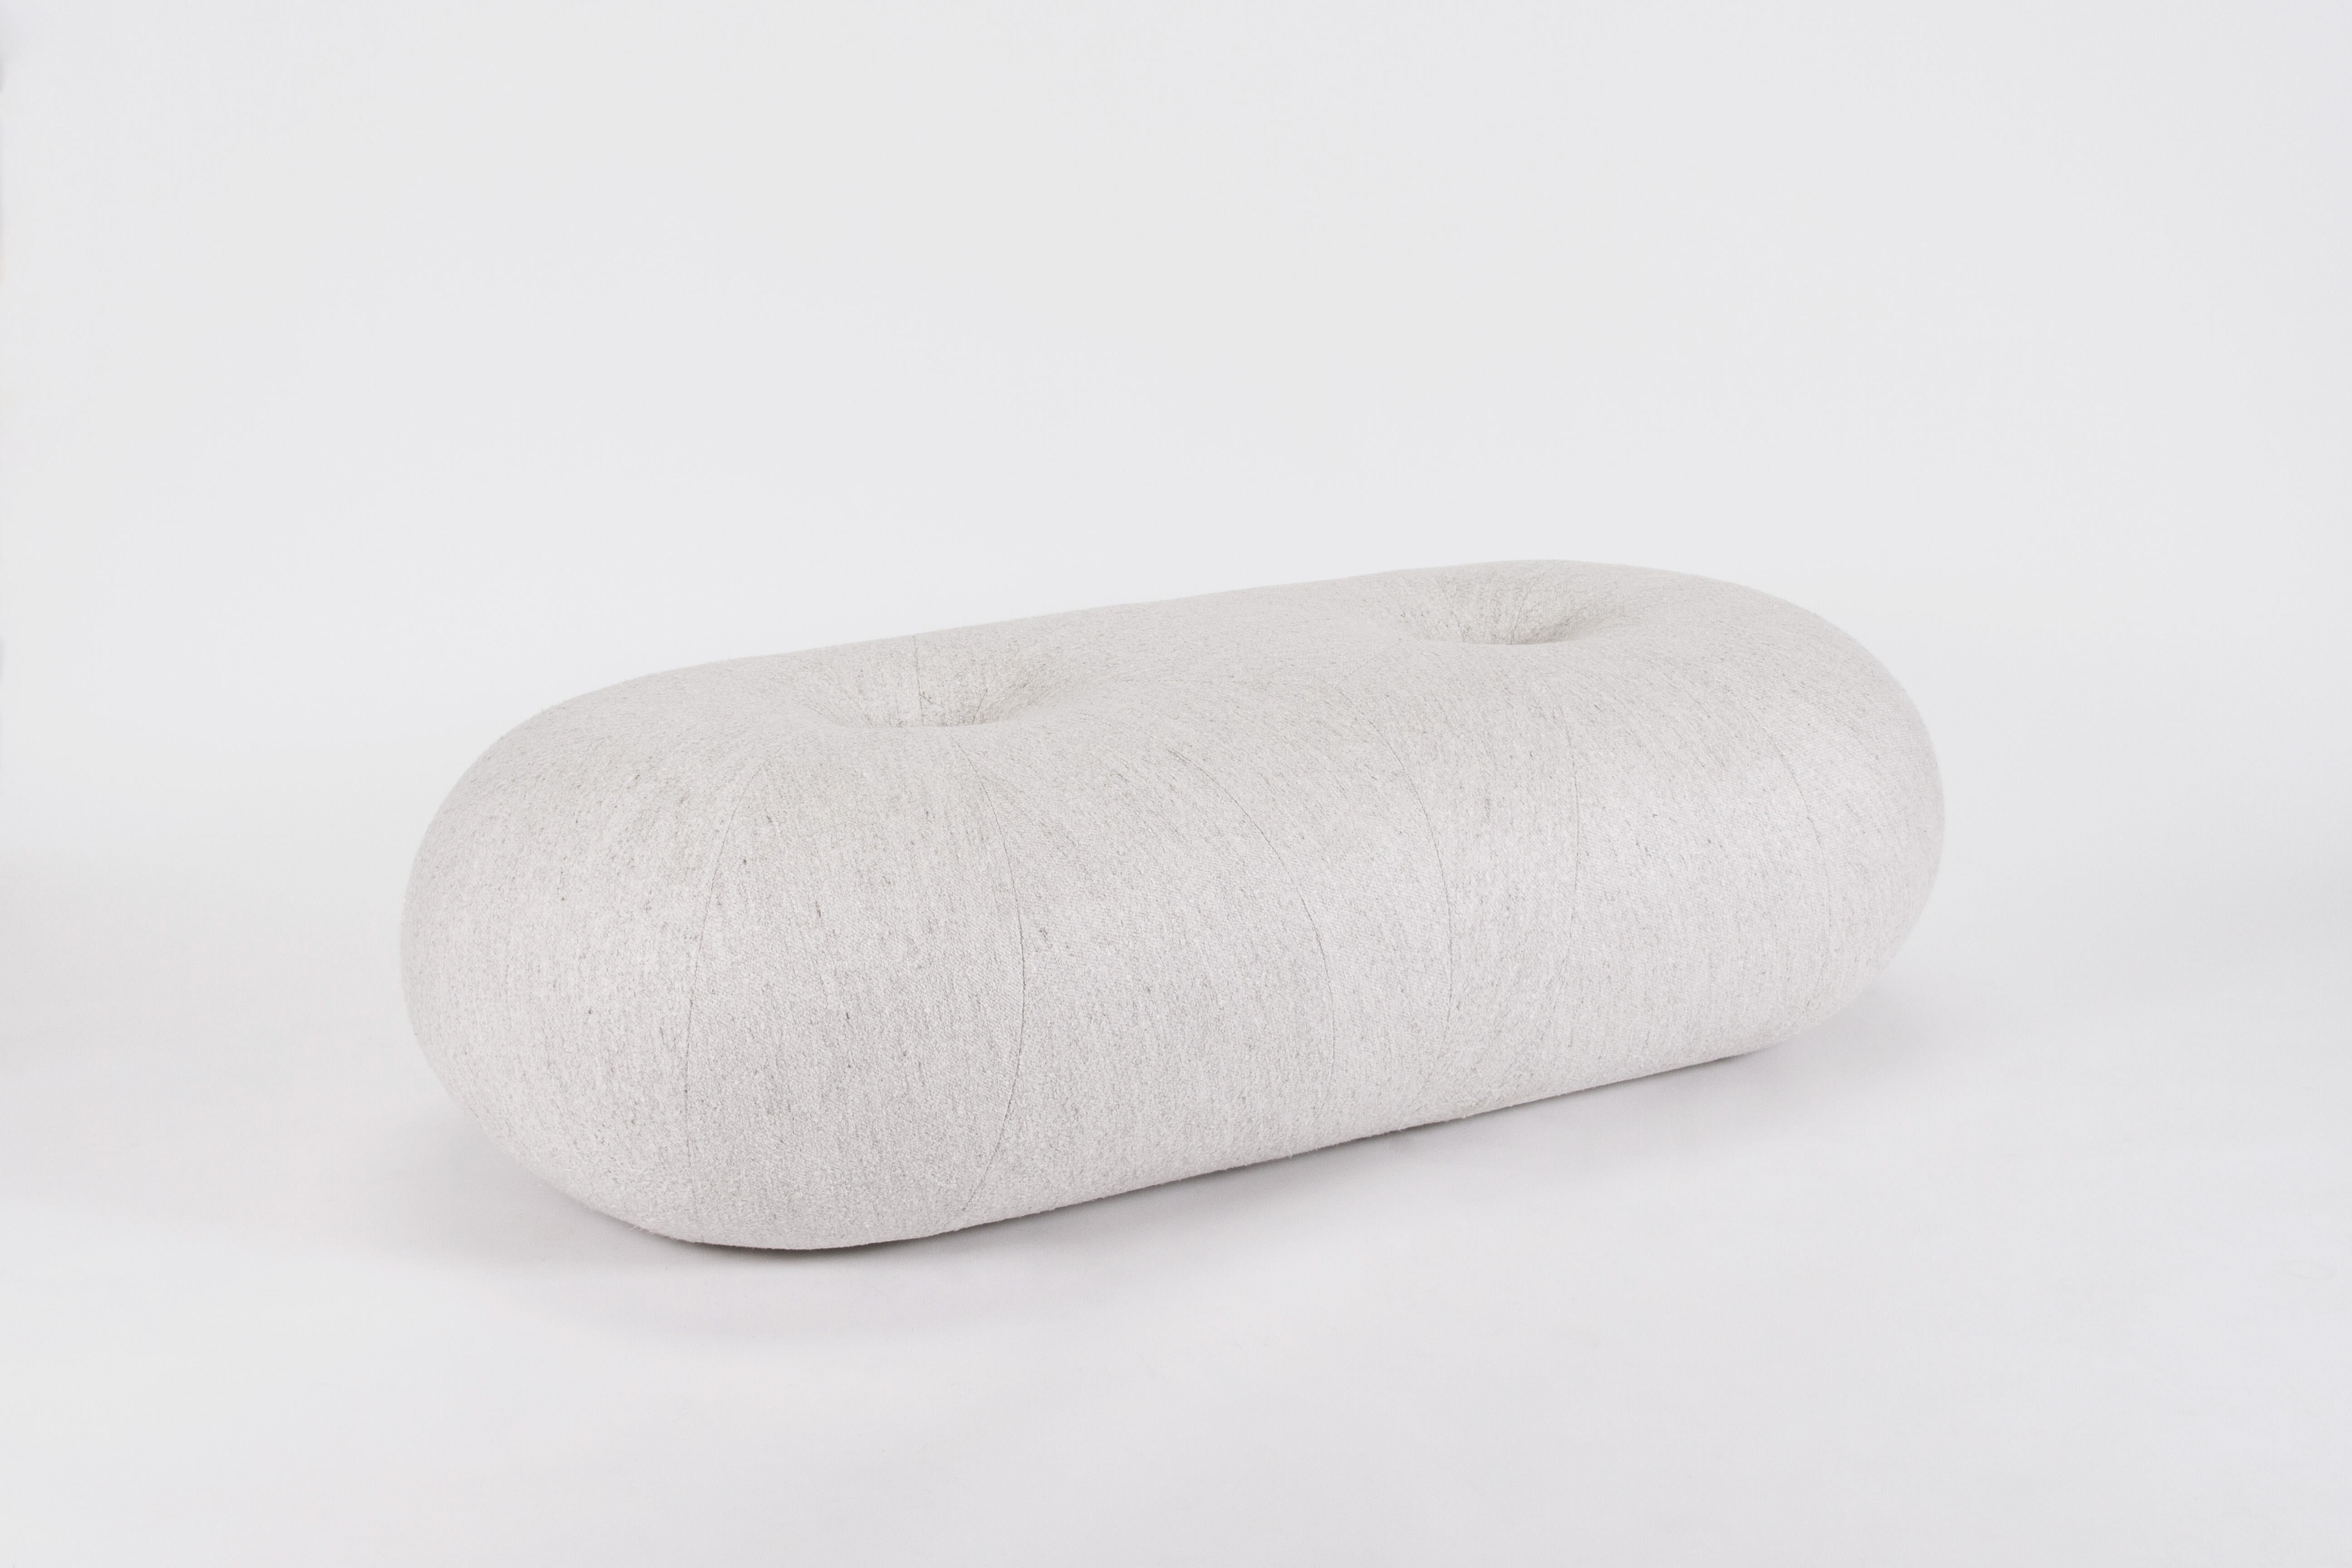 HOLE Bench Contemporary Upholstered Seat by Estudio Persona